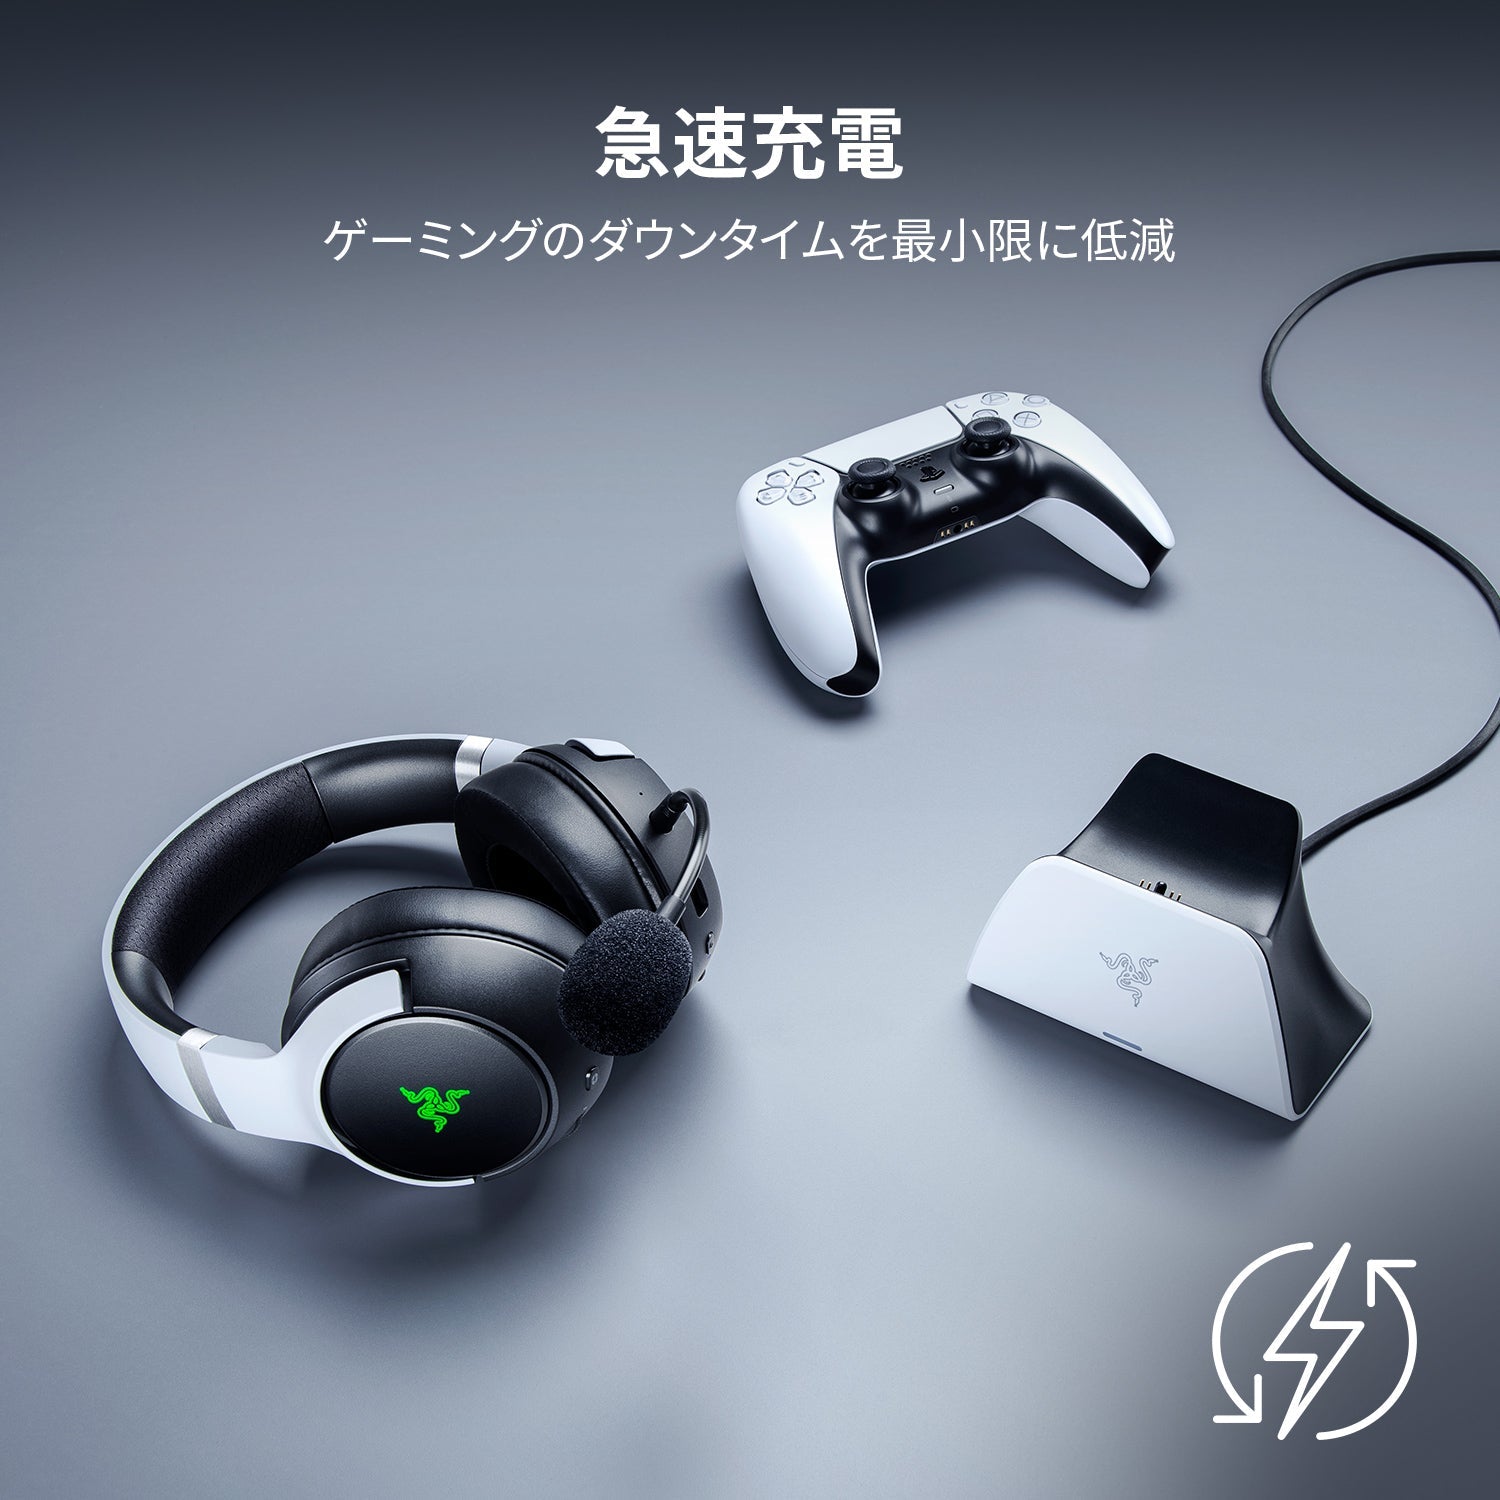 Razer Quick Charging Stand for PS5 (Blue)  クイック チャージング スタンド フォー ピーエスファイブ ブルー thumbnail 2